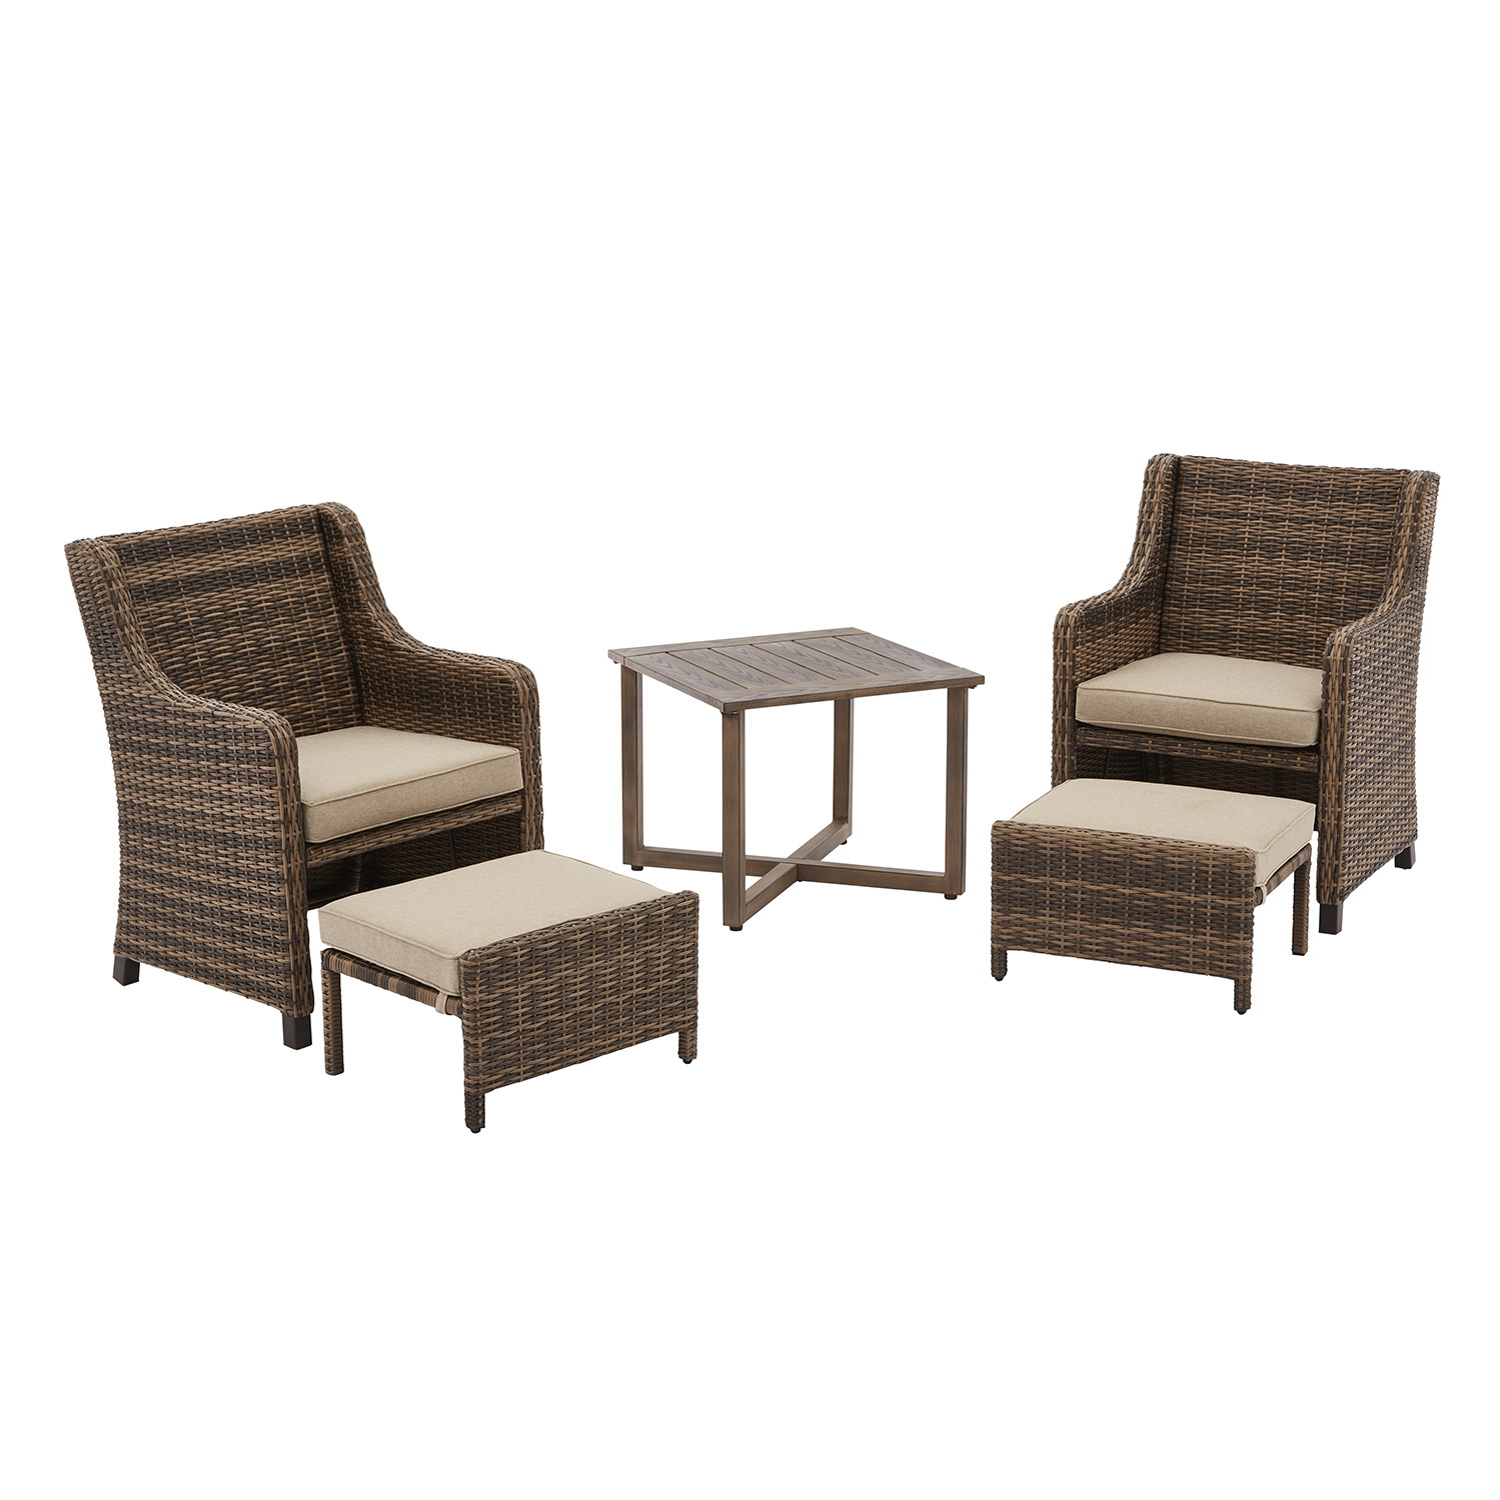 Better Homes & Garden Hawthorne Park 5 Piece Outdoor Chat Set with Beige Cushions - image 2 of 11